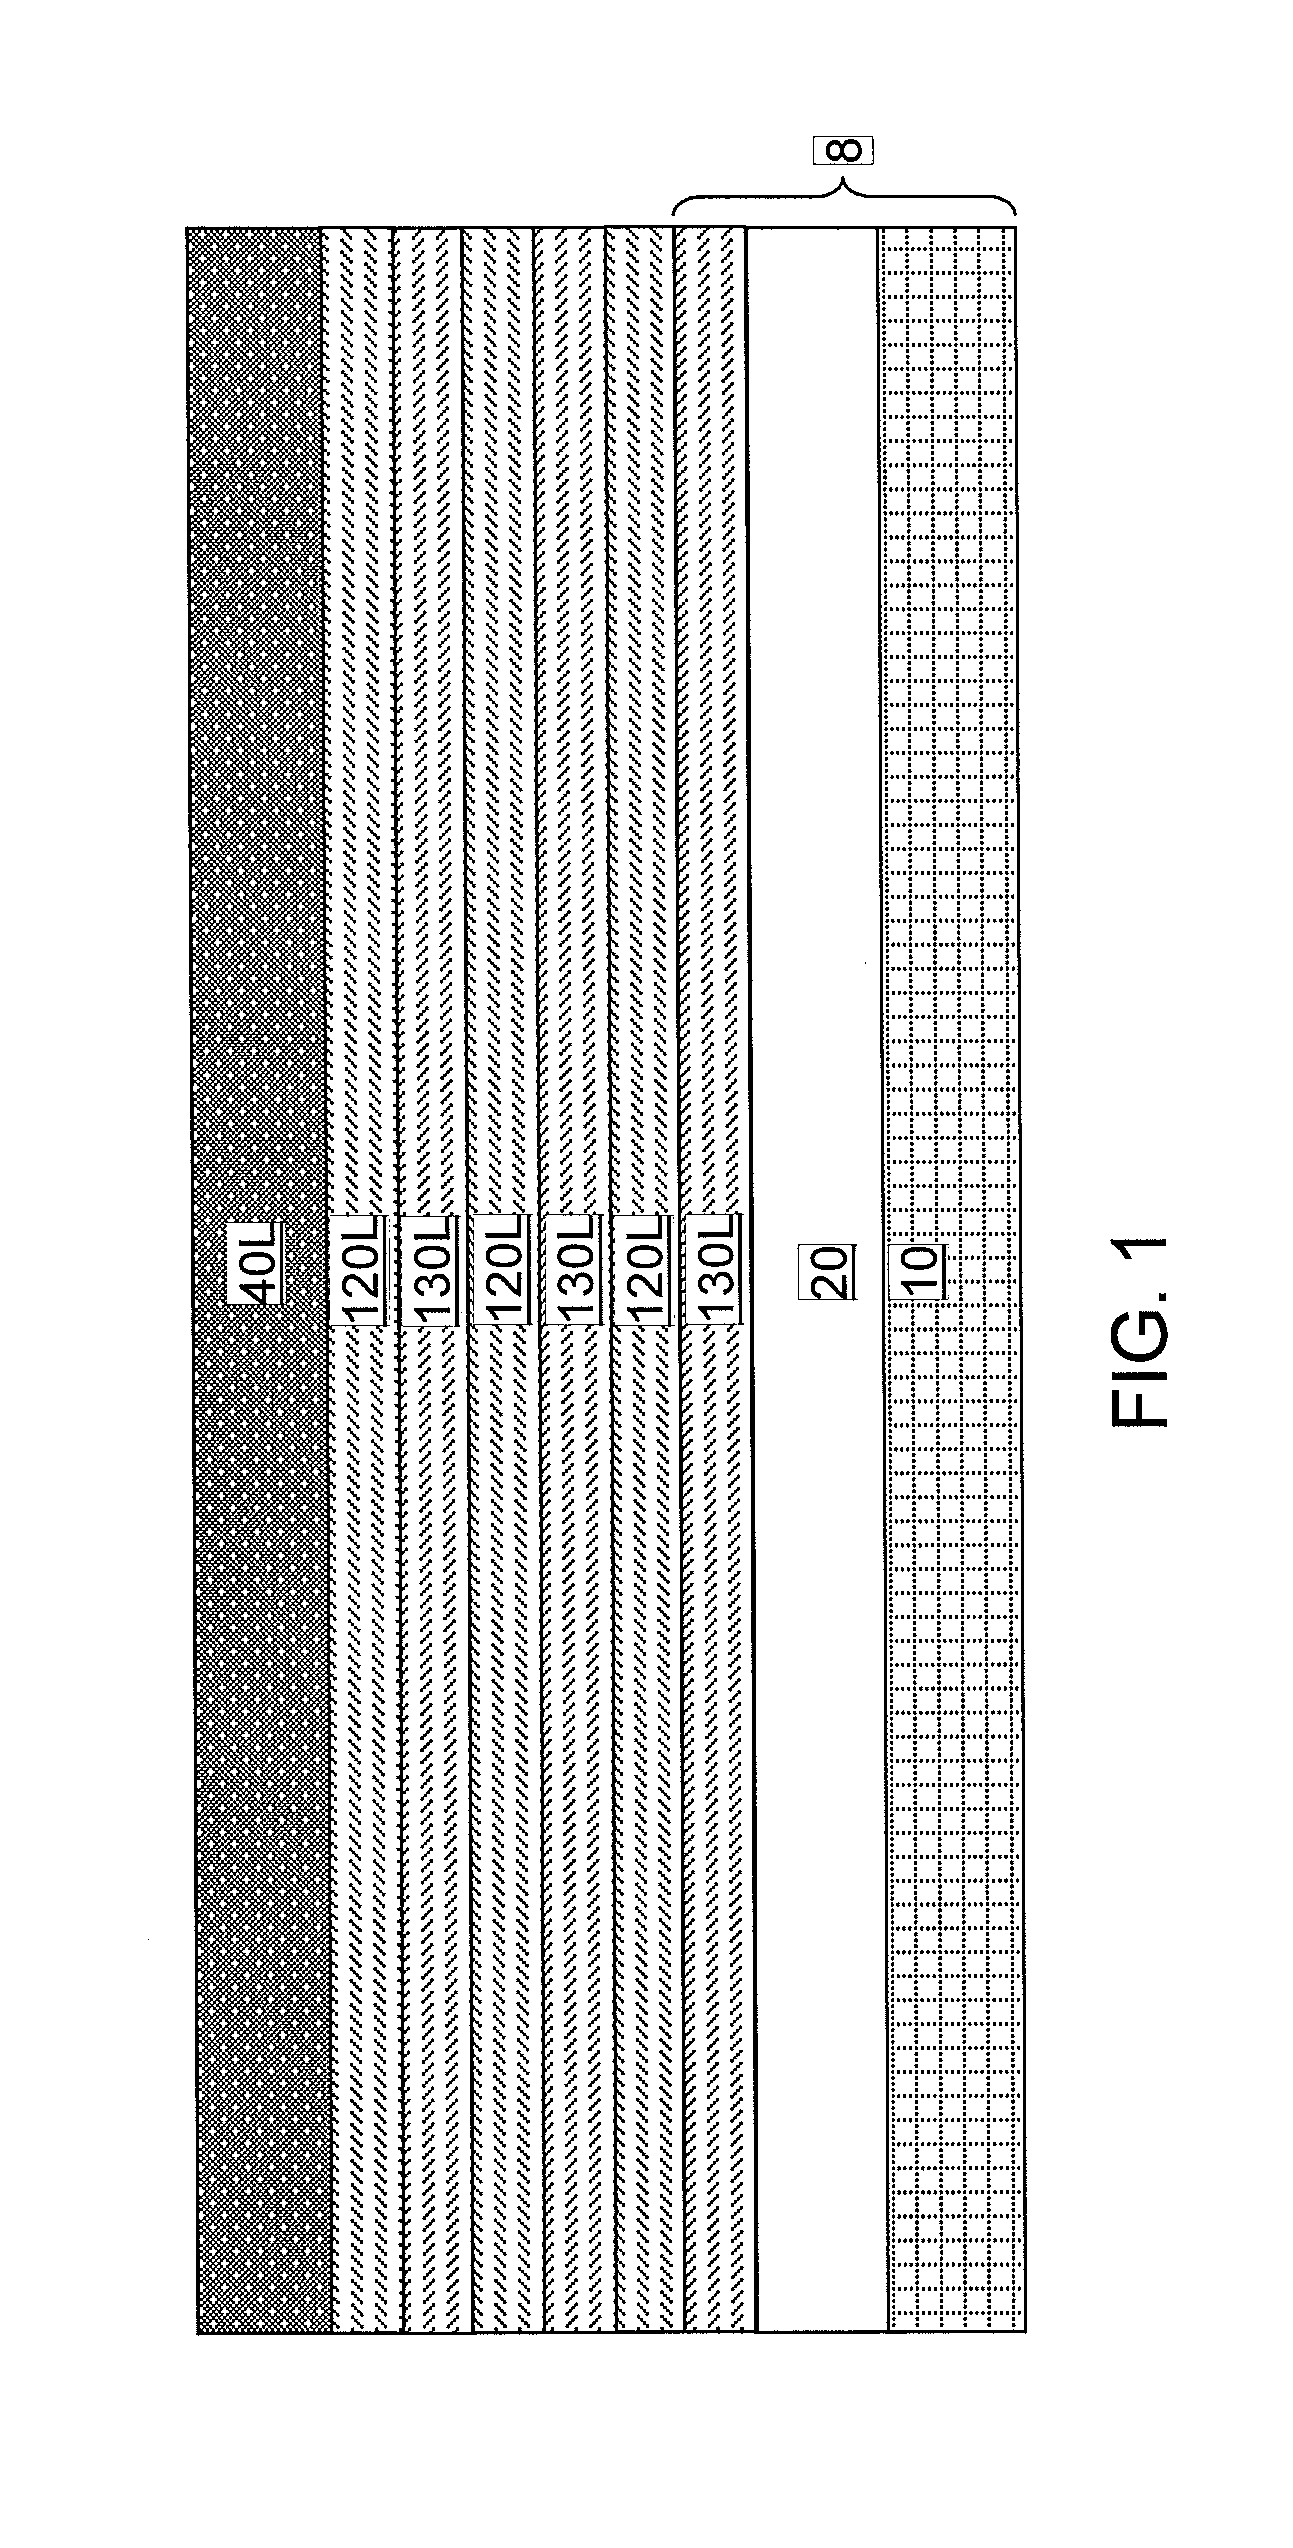 Non-replacement gate nanomesh field effect transistor with epitixially grown source and drain